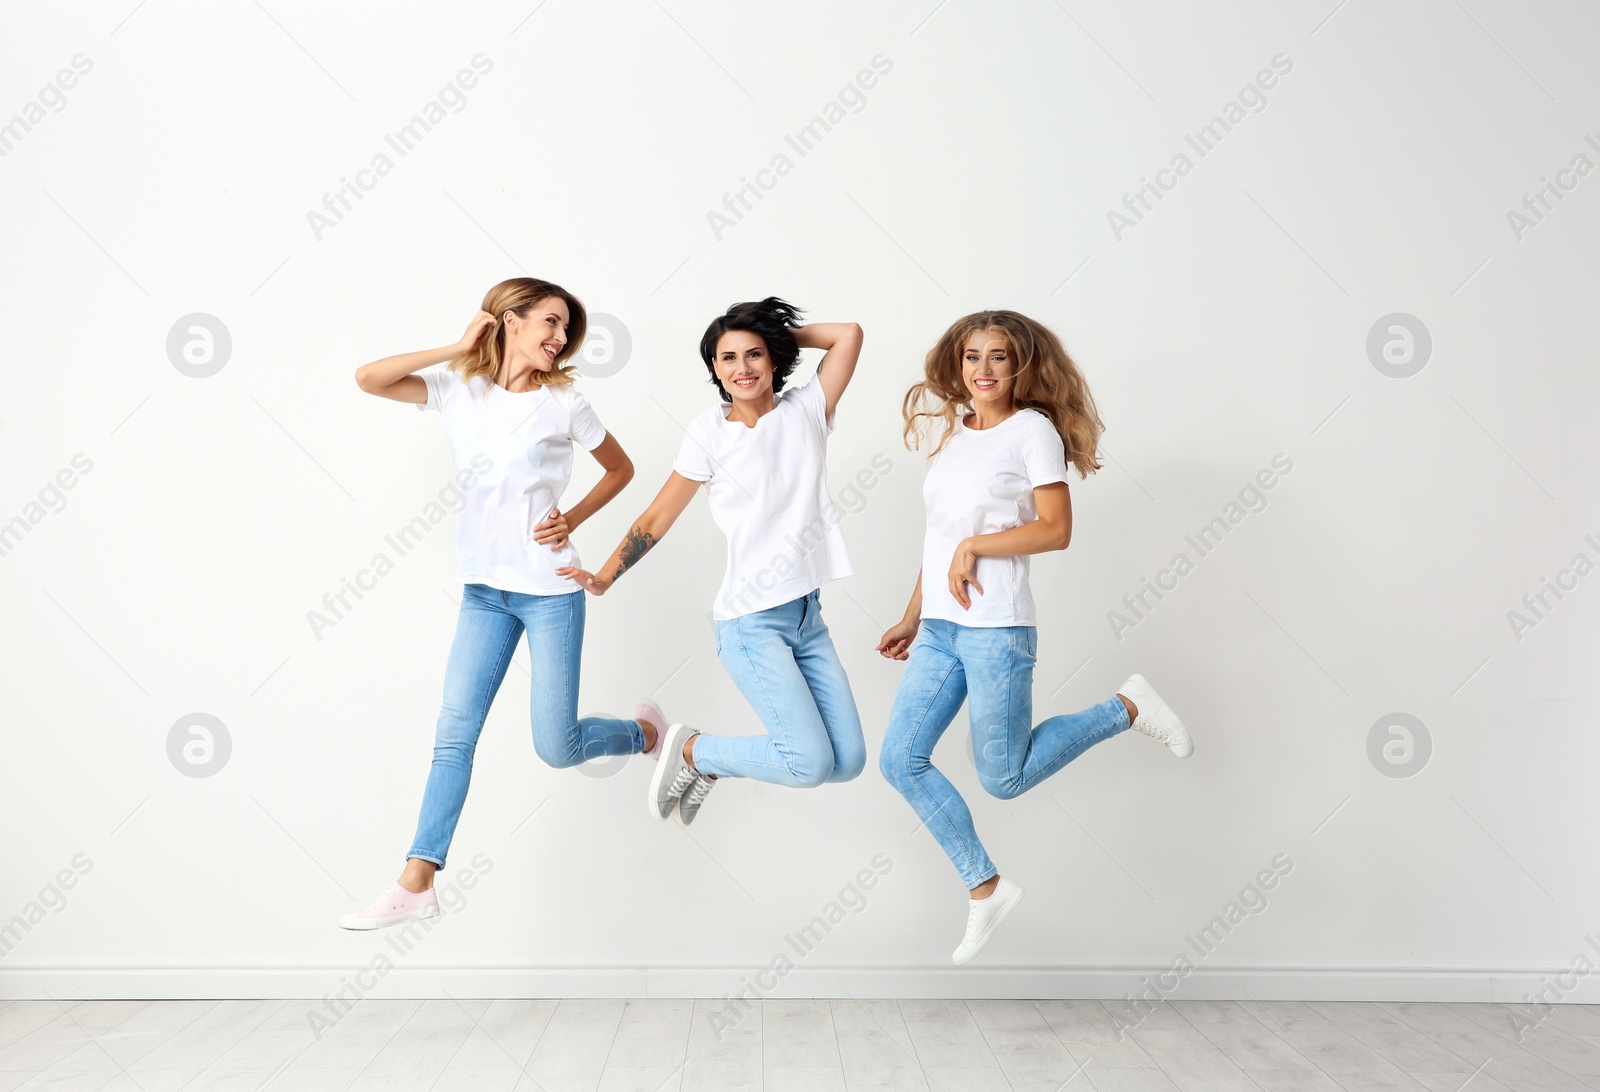 Photo of Group of young women in jeans jumping near light wall